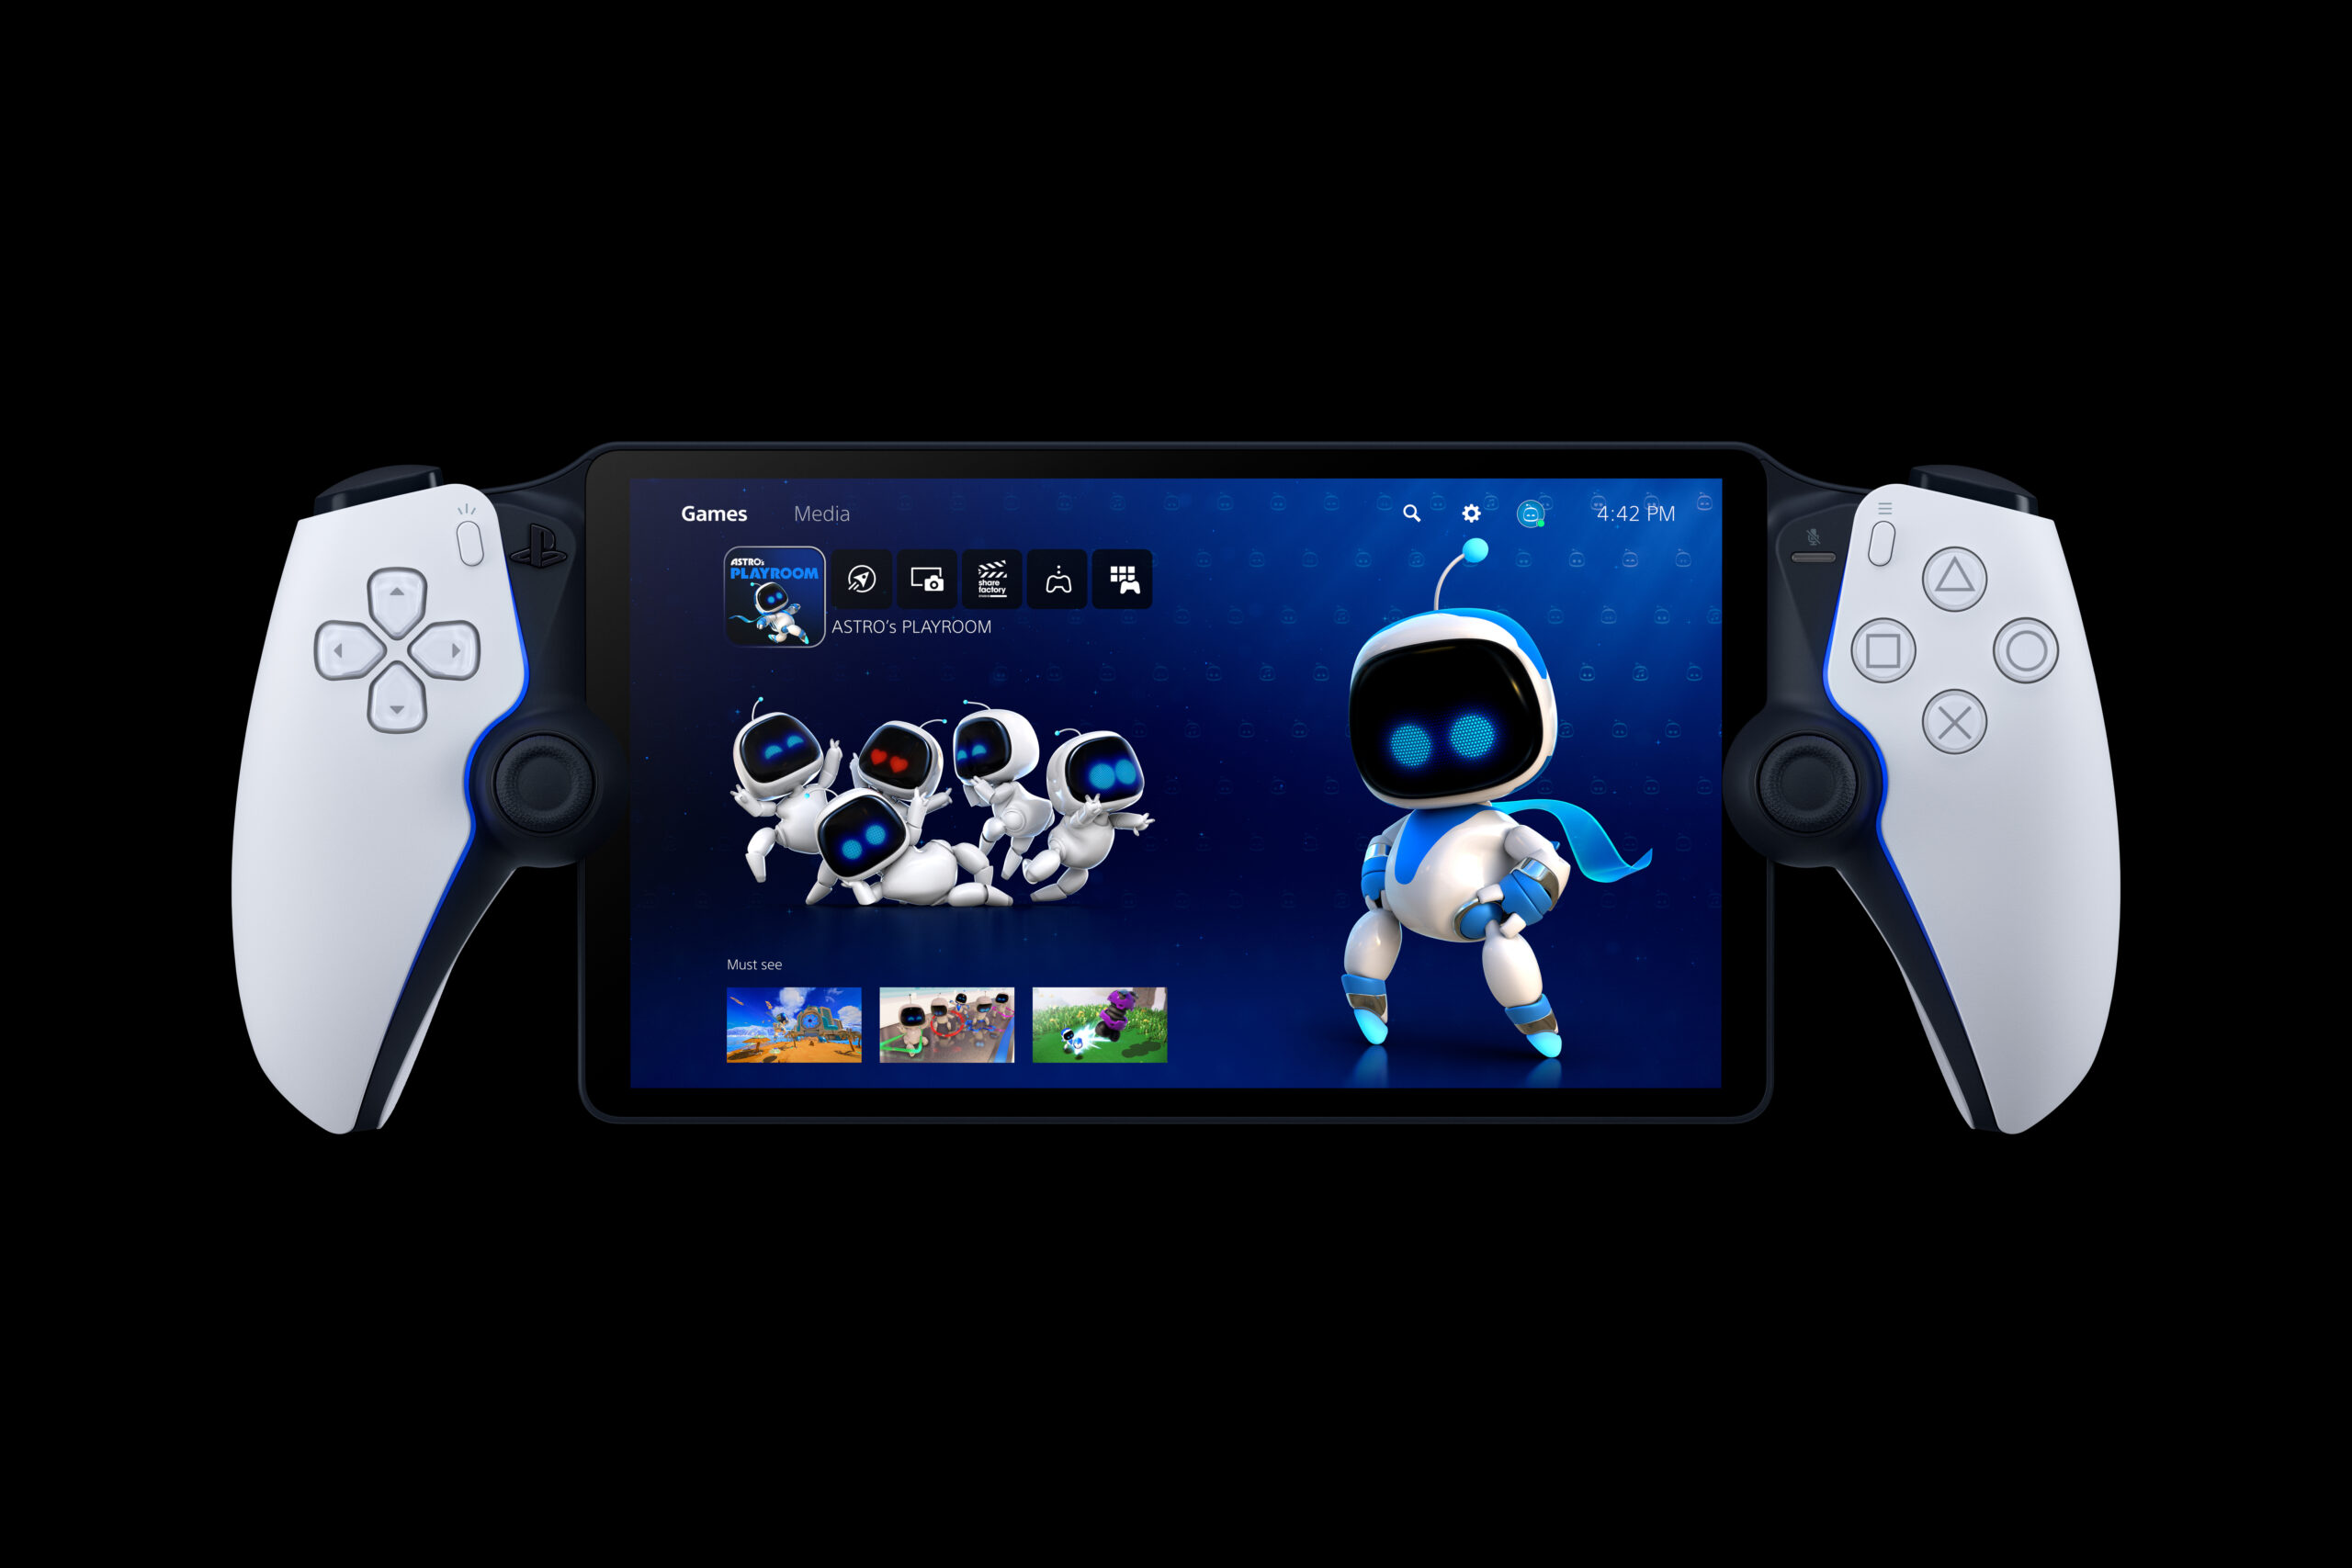 PlayStation Portal: News, Price, Release Date, and Specs